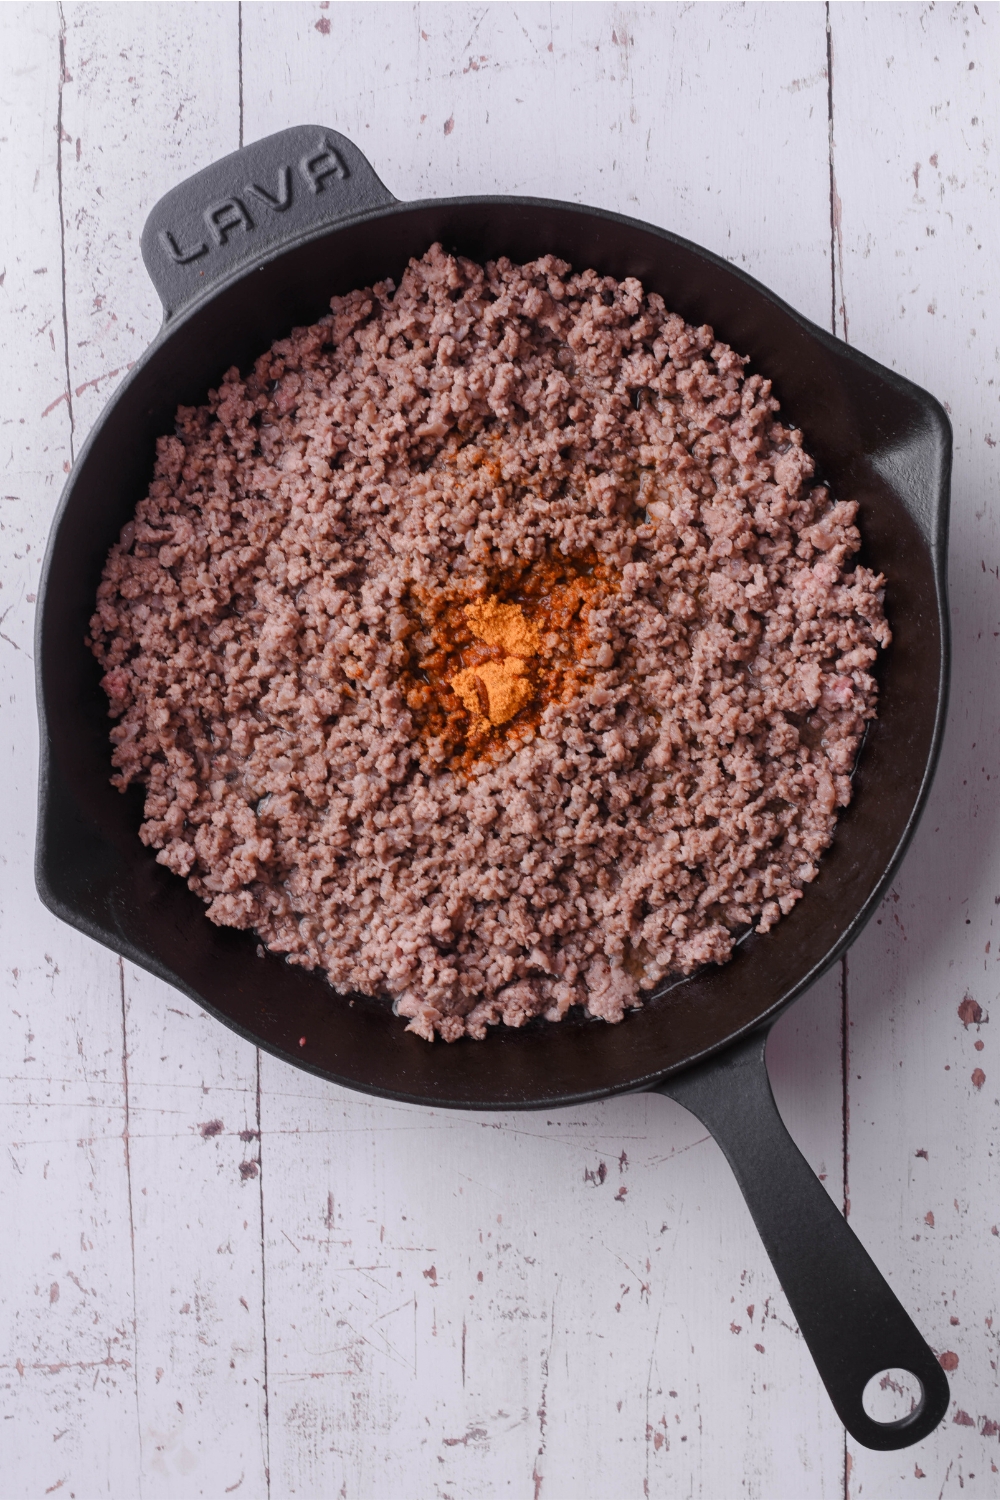 Cooked ground beef with taco seasoning in the middle in a skillet.